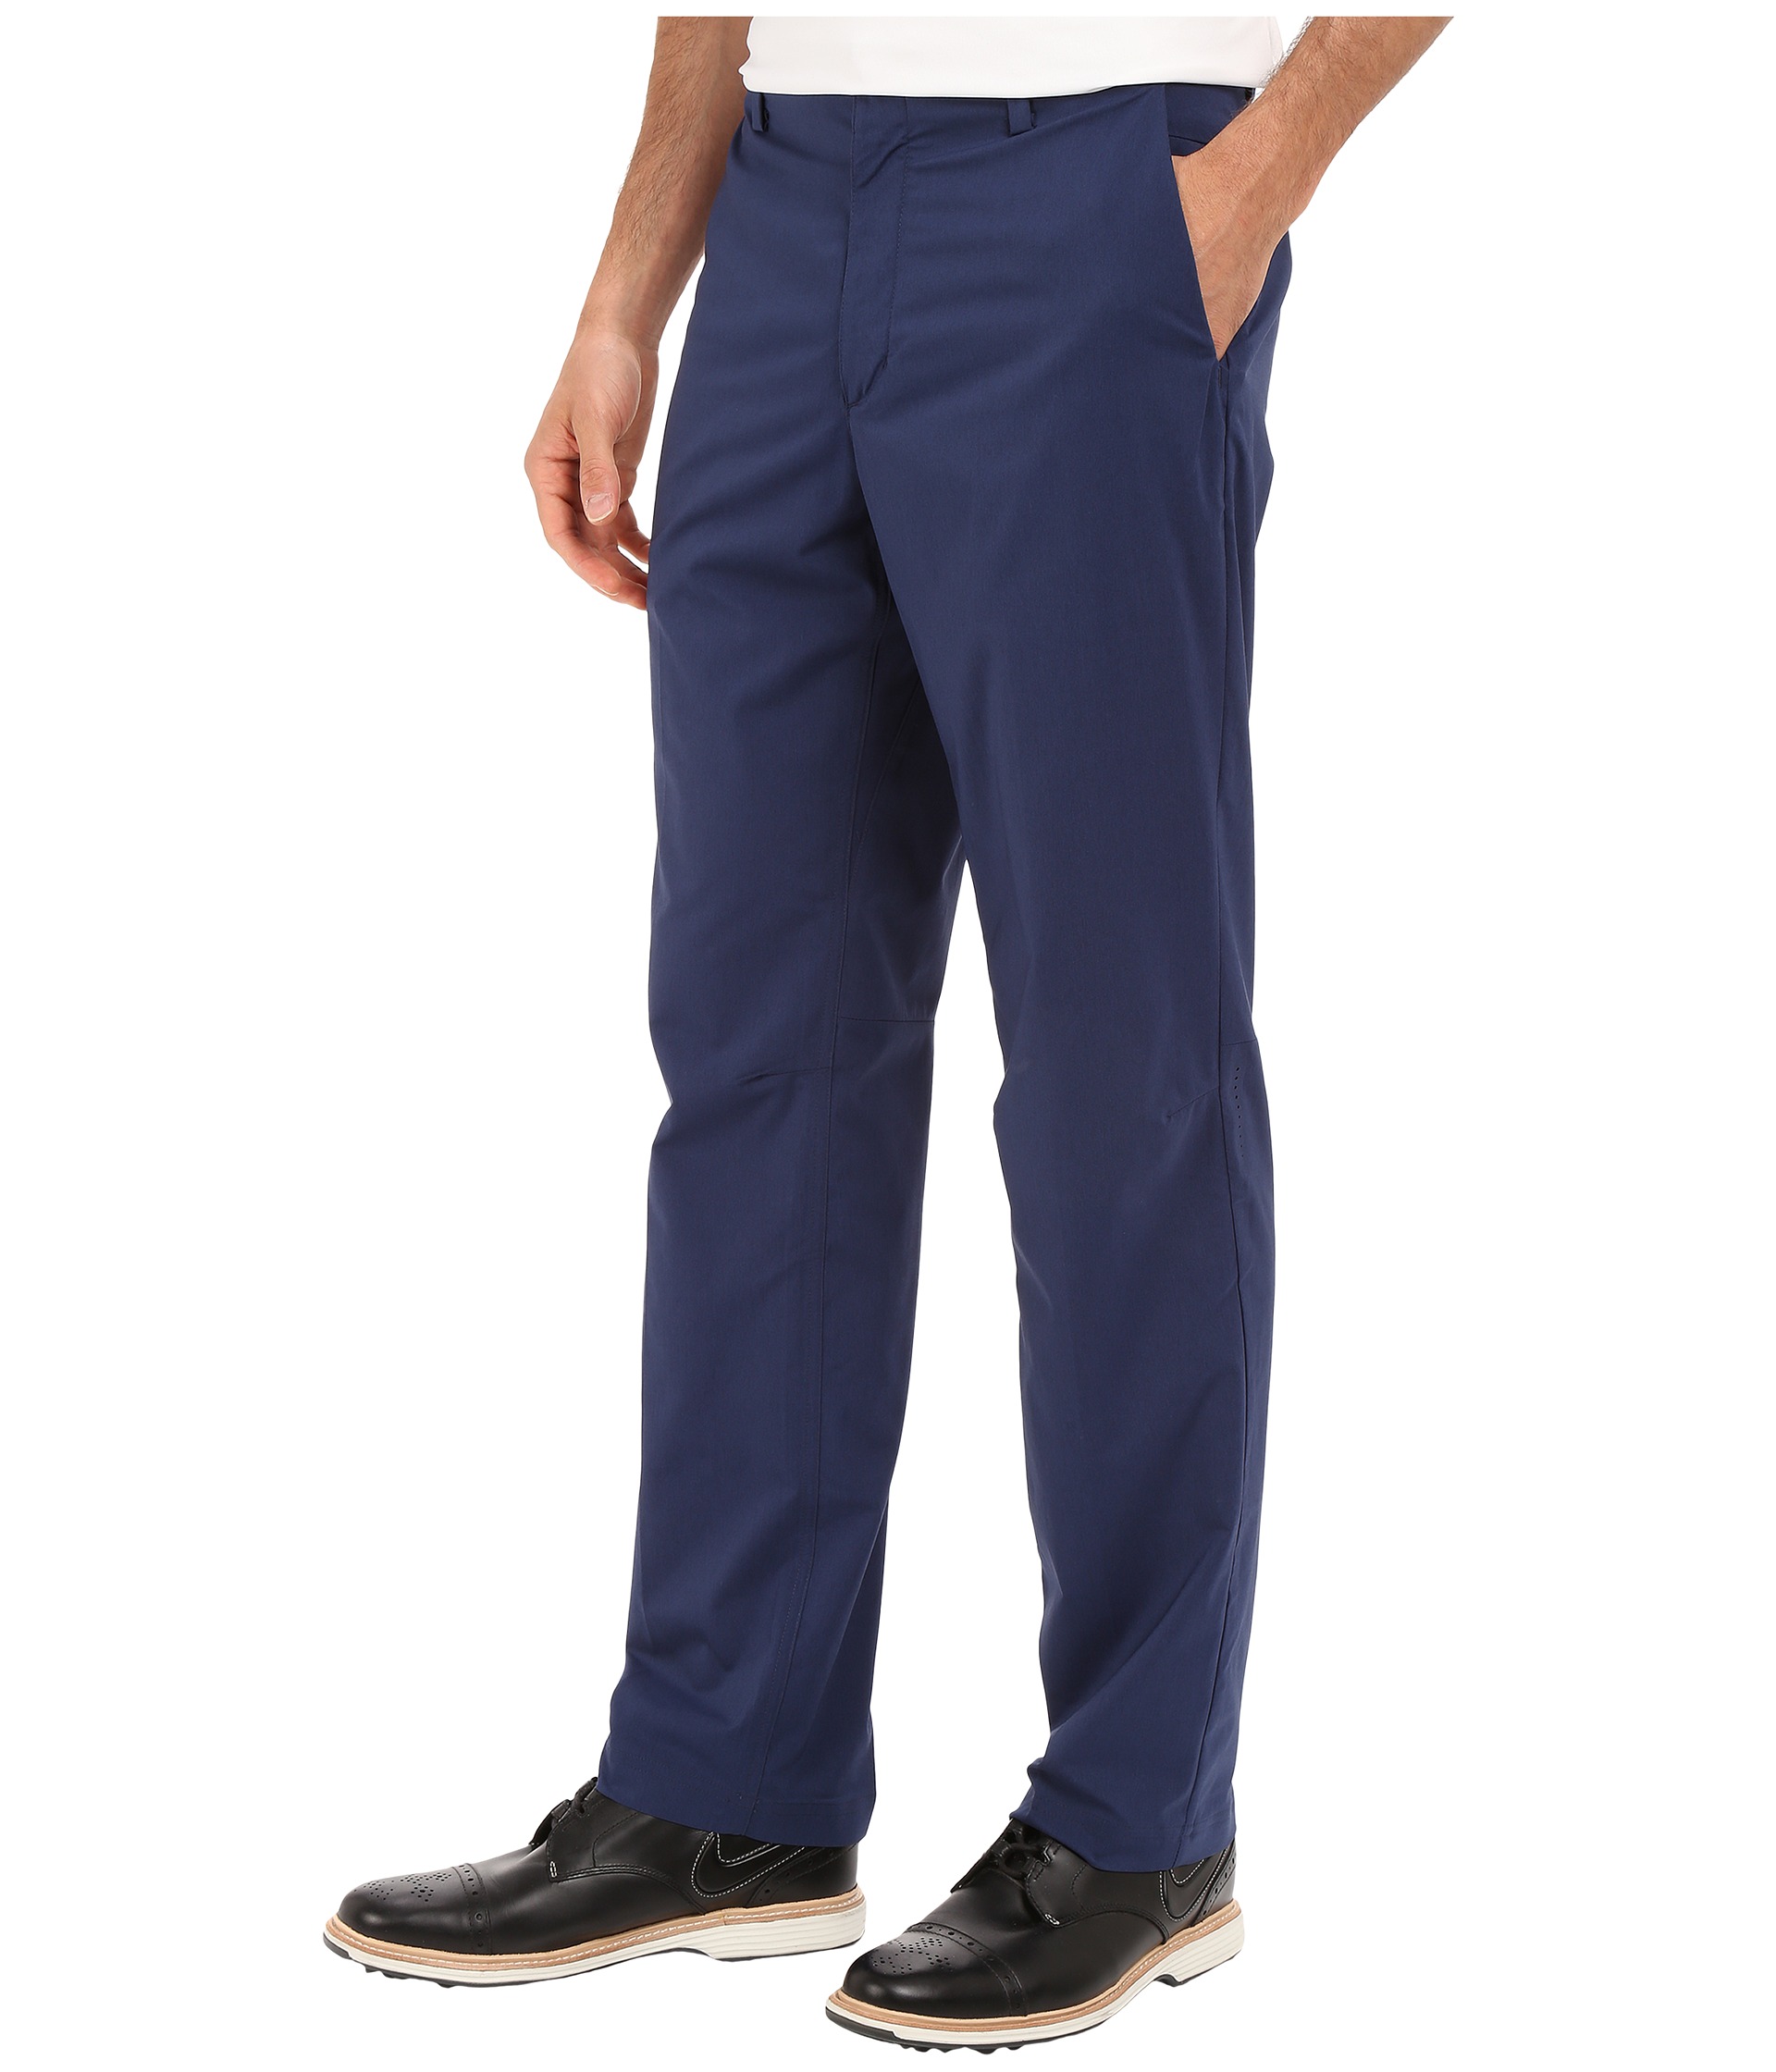 Nike Golf Tiger Woods Adaptive Fit Woven Pants at Zappos.com